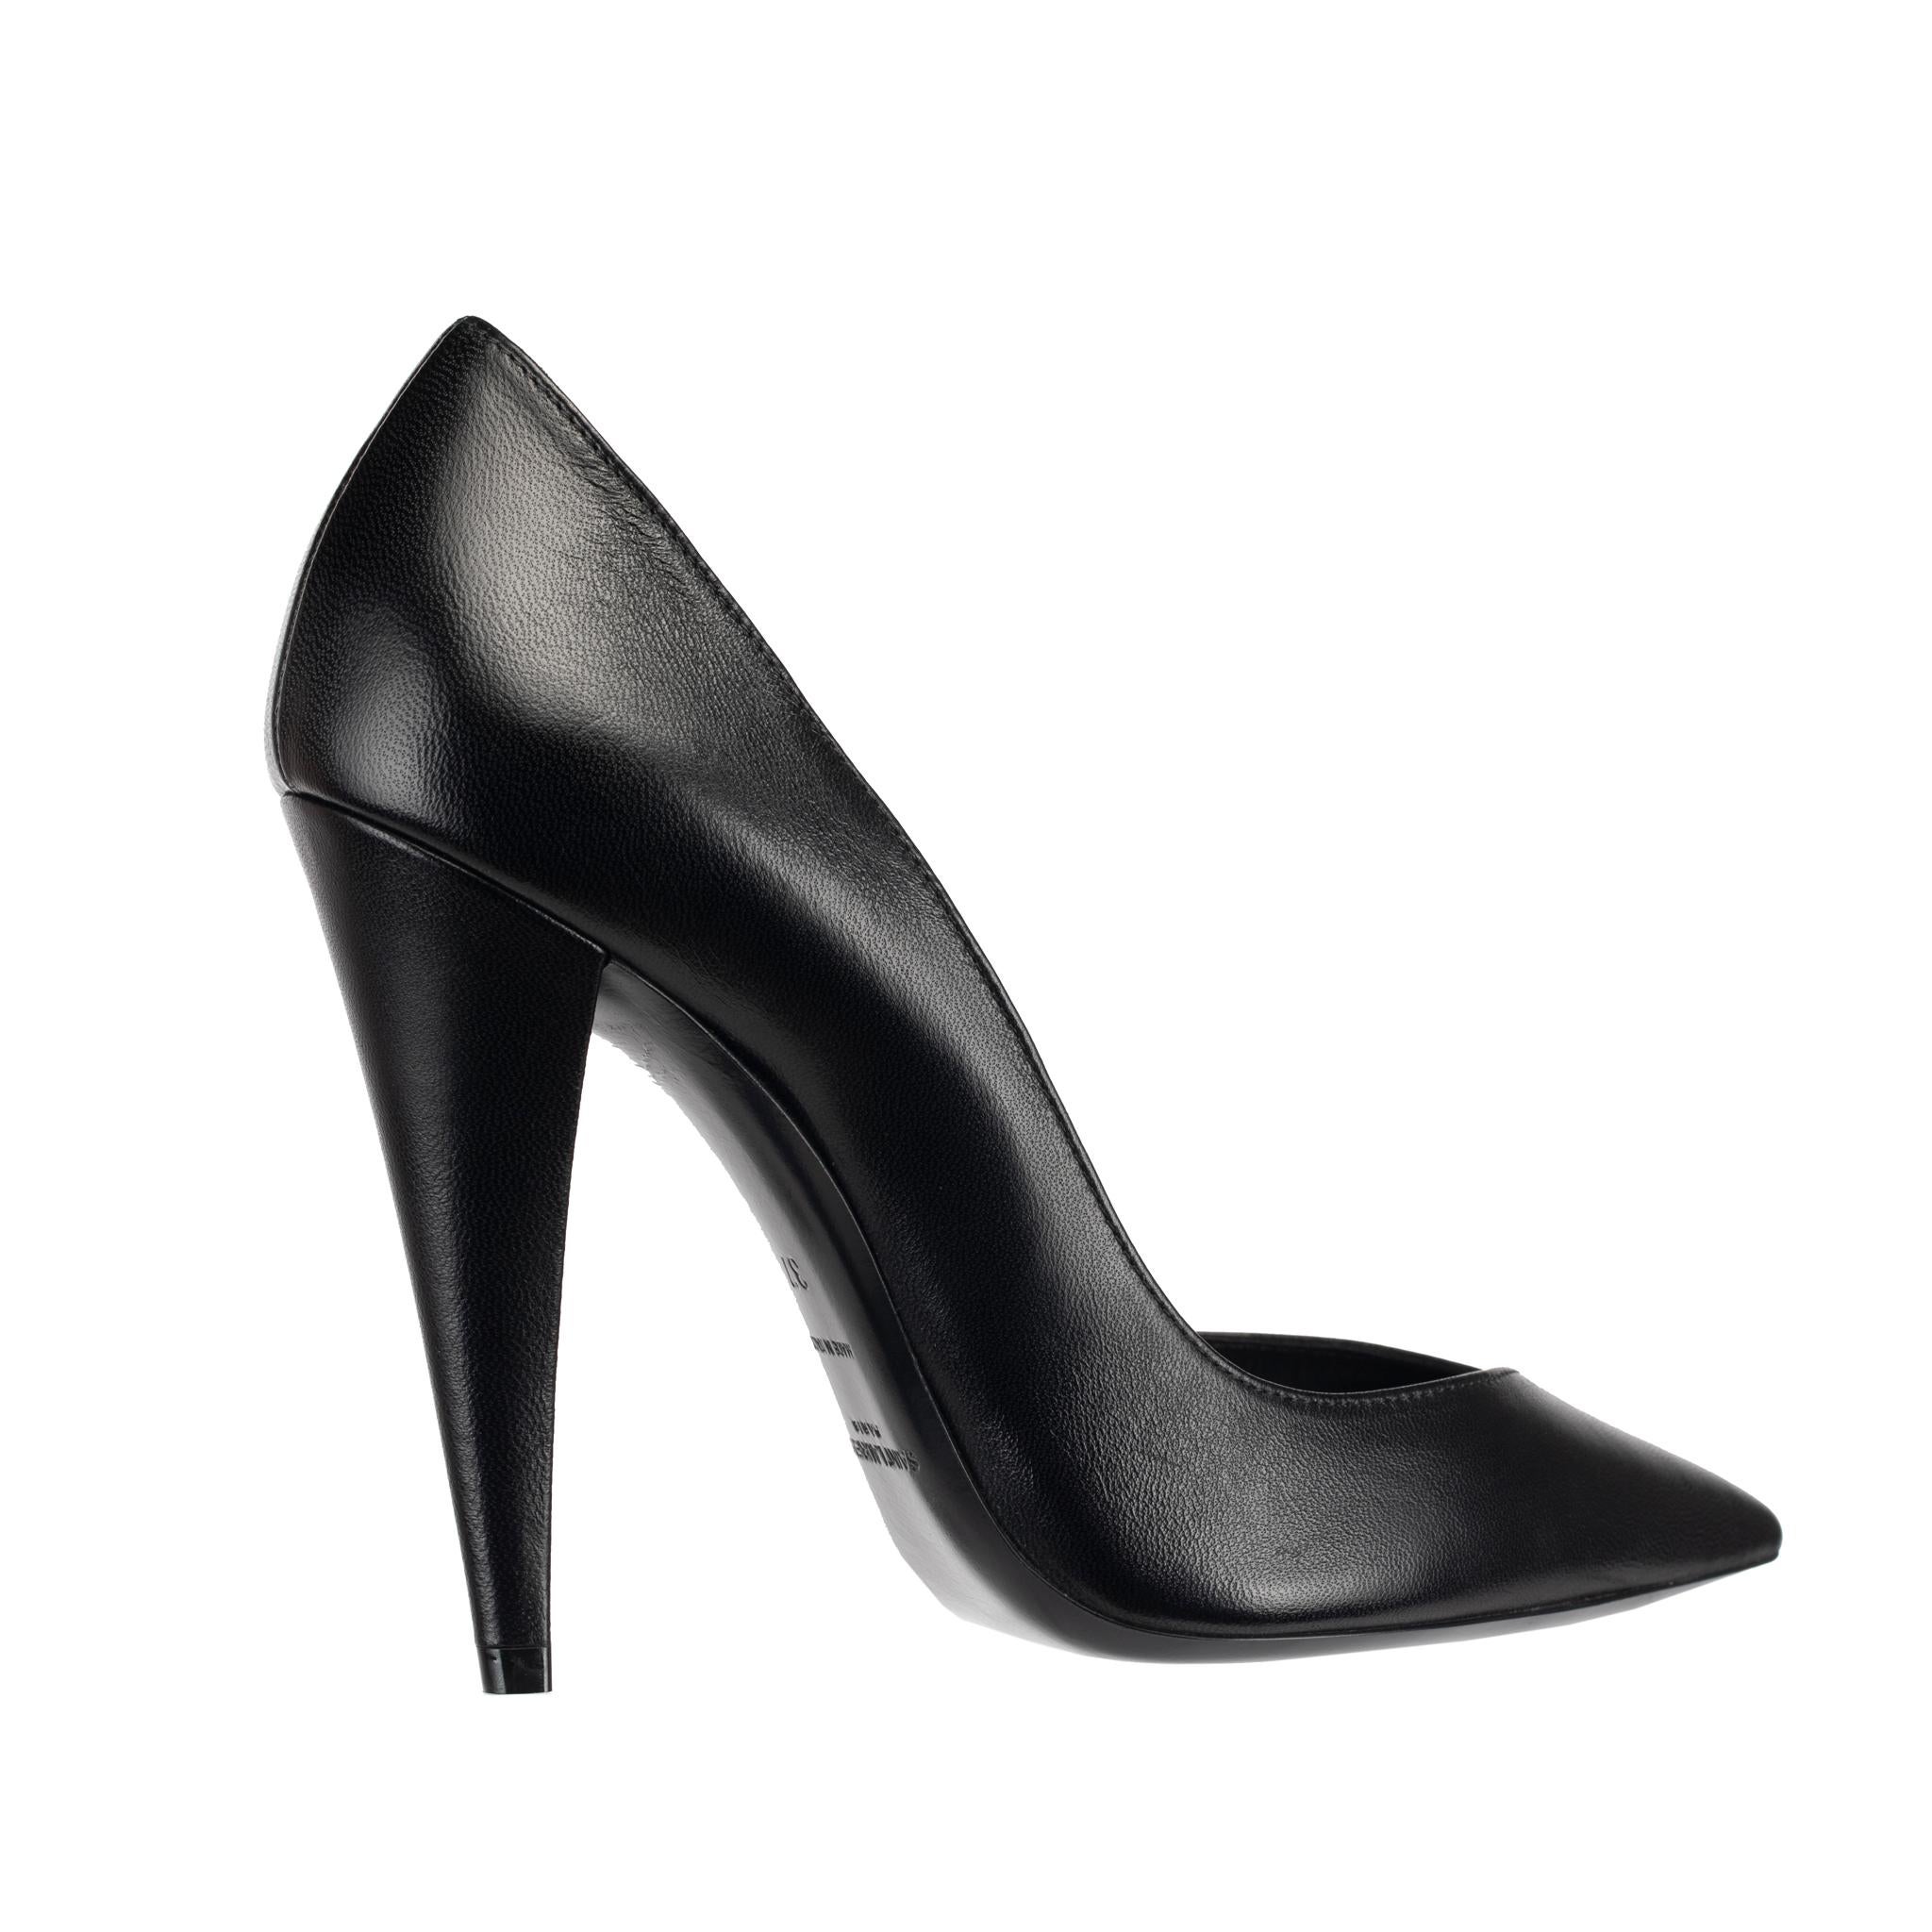 The Yves Saint Laurent Decollete Era Pumps are a stylish and sophisticated choice crafted from premium, smooth black leather. The timeless silhouette offers a comfortable and secure fit, perfect for long days at the office or a night out with